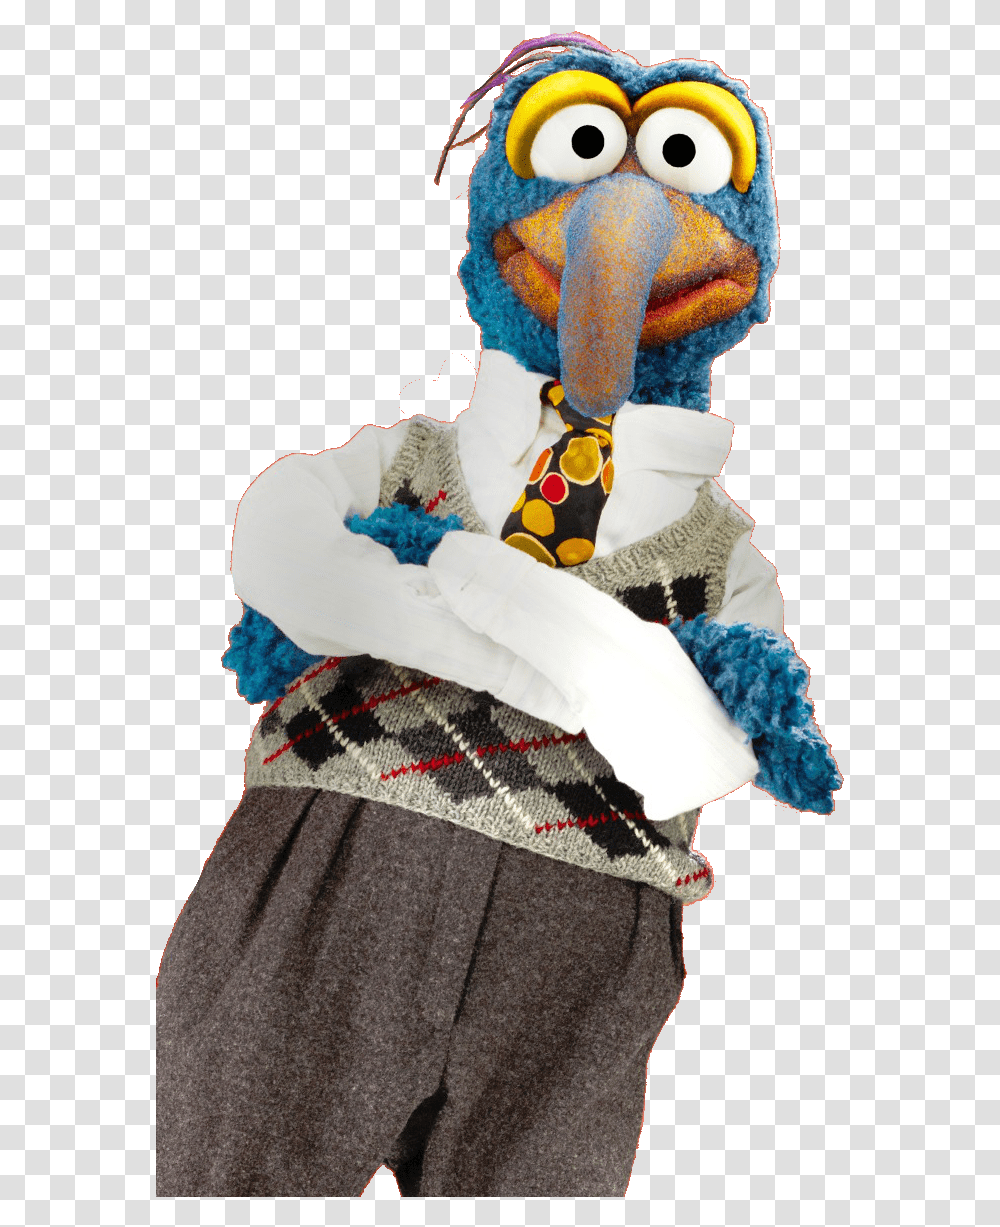 Muppets Pluspng Muppets, Apparel, Figurine, Sweets Transparent Png